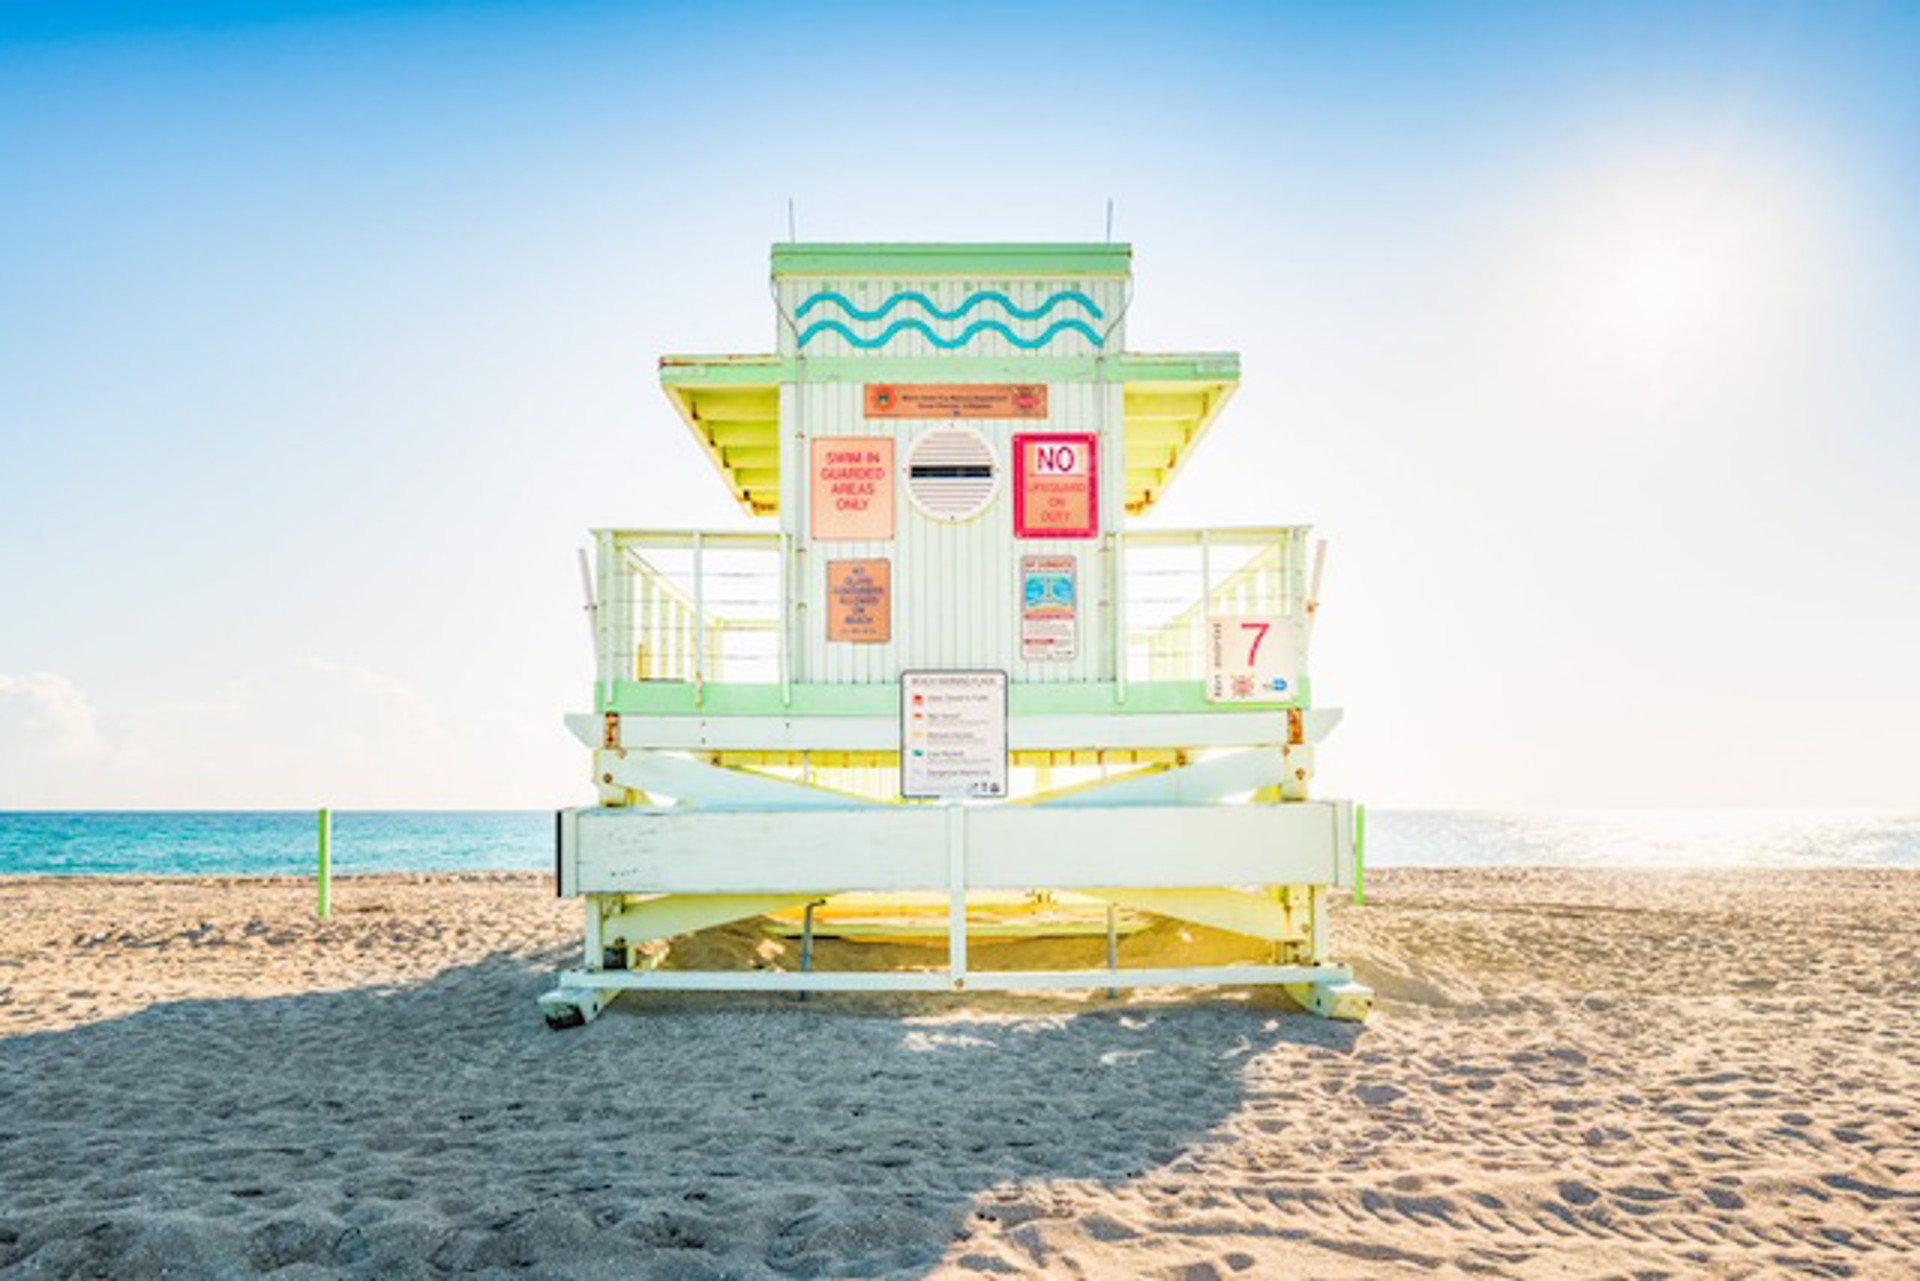 Haulover Beach Lifeguard Stand 7 by Peter Mendelson